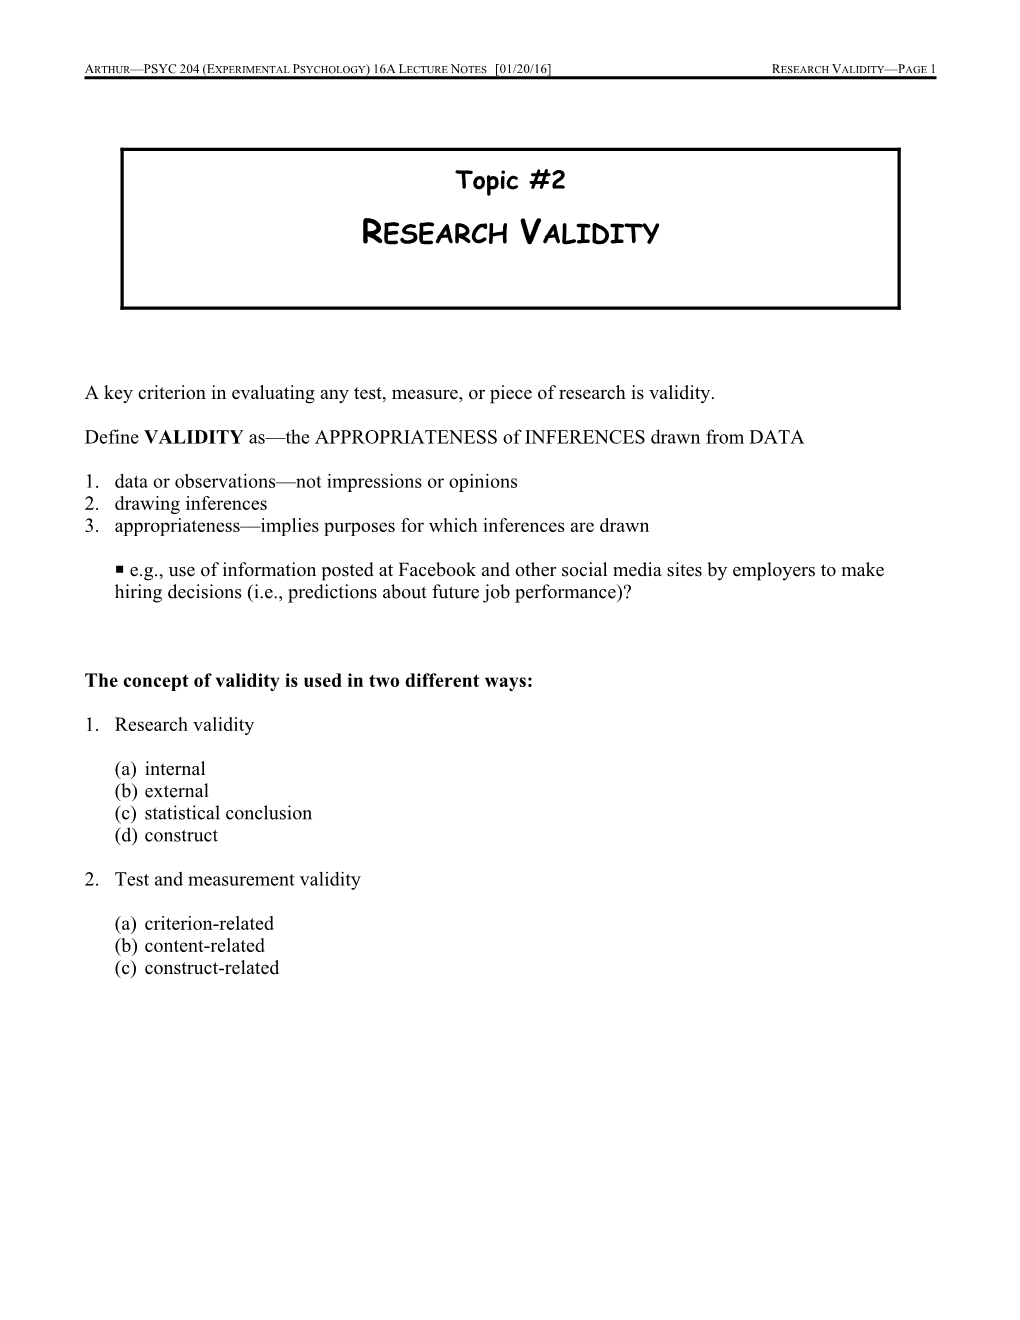 Research Validity—Page 1